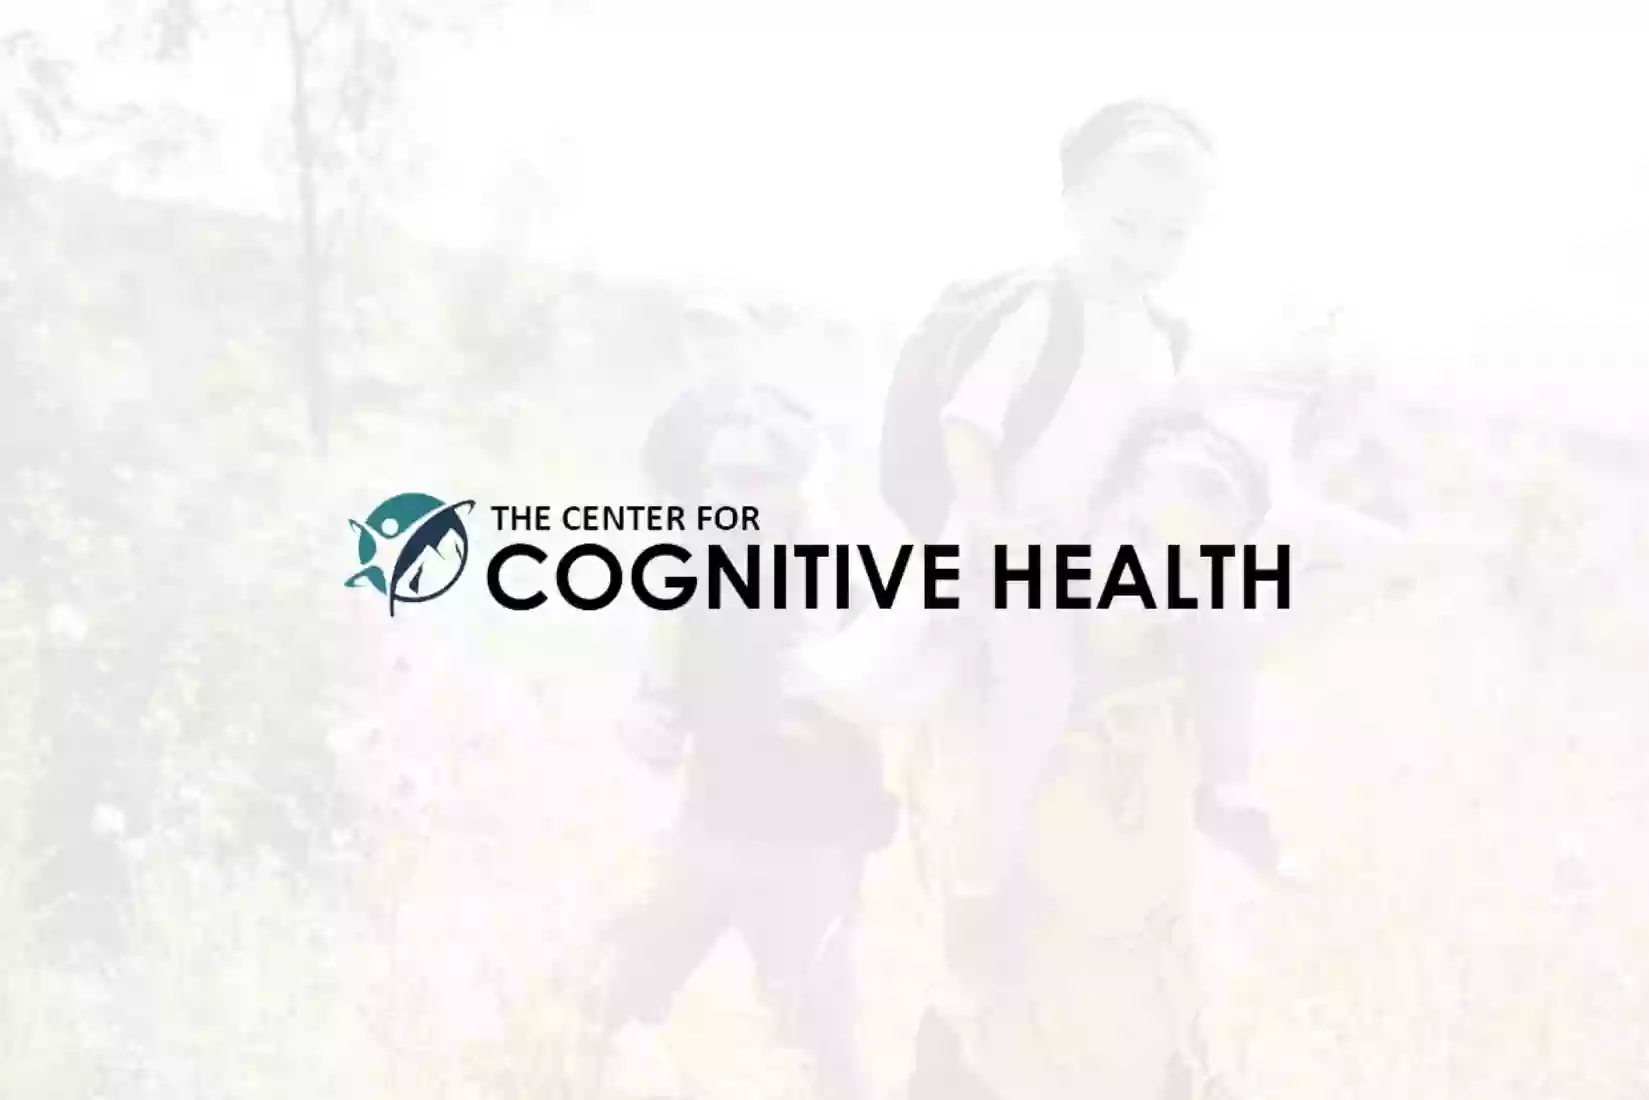 The Center For Cognitive Health